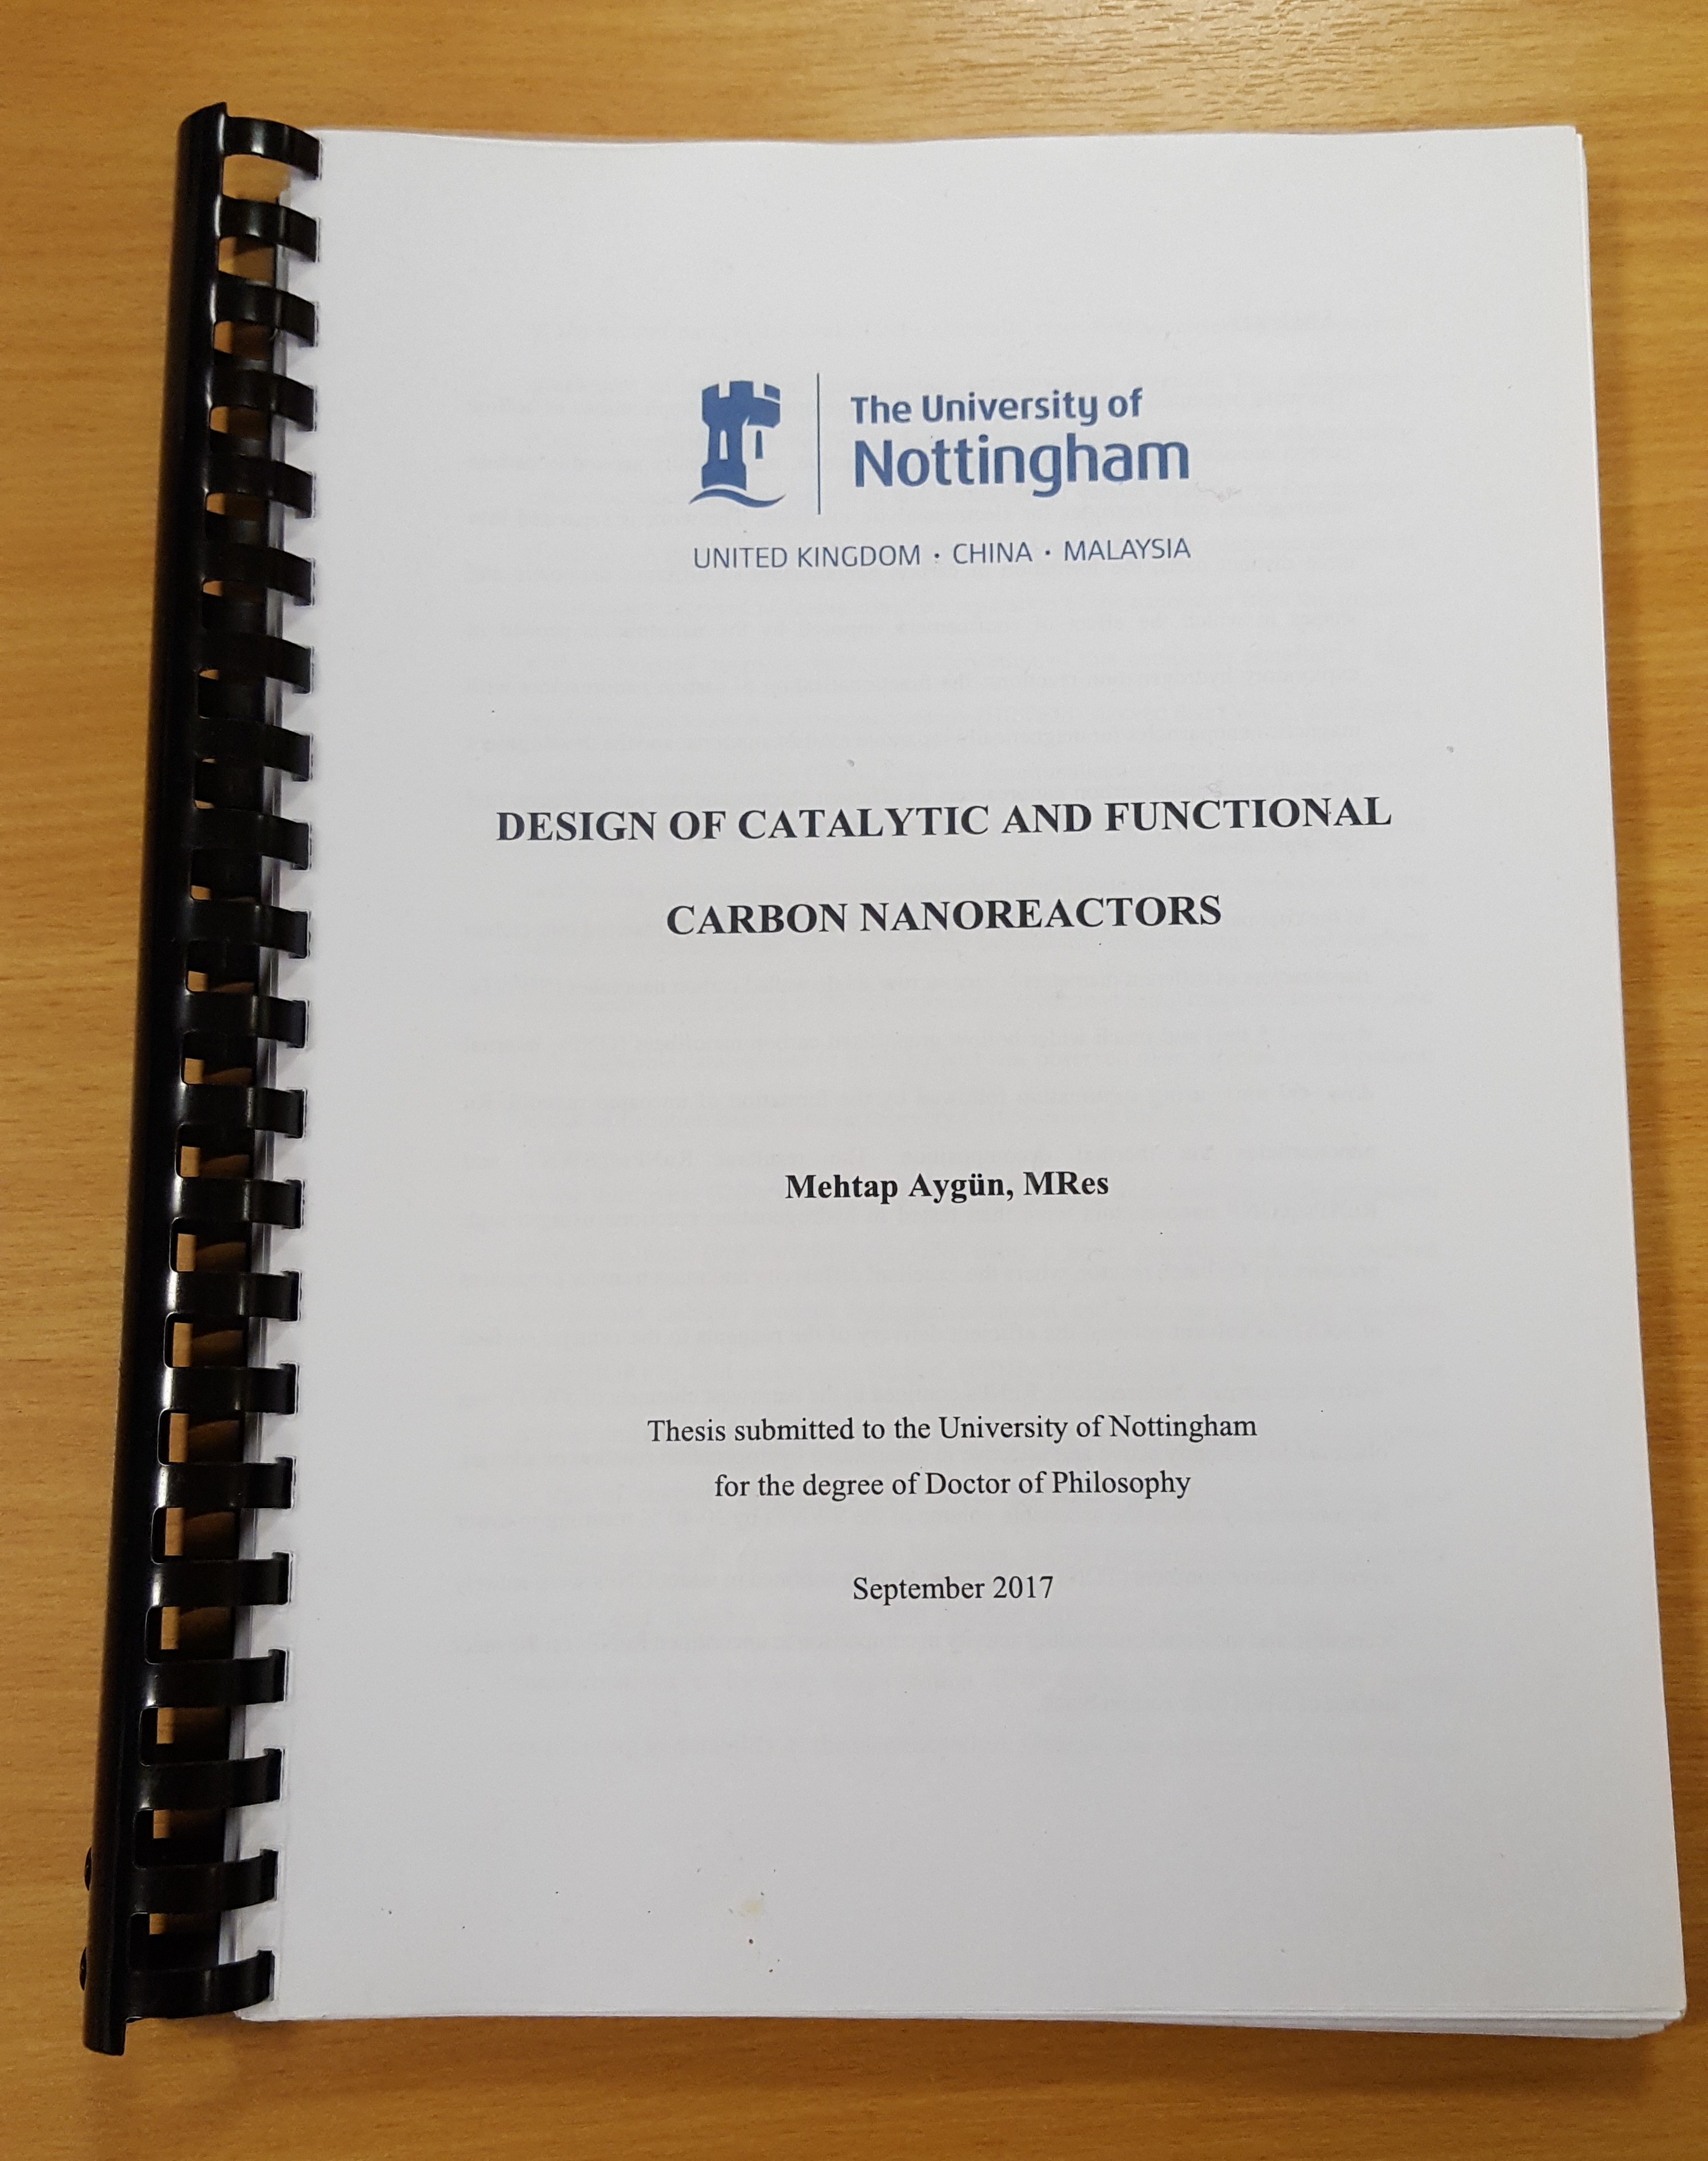 Mehtap's Thesis